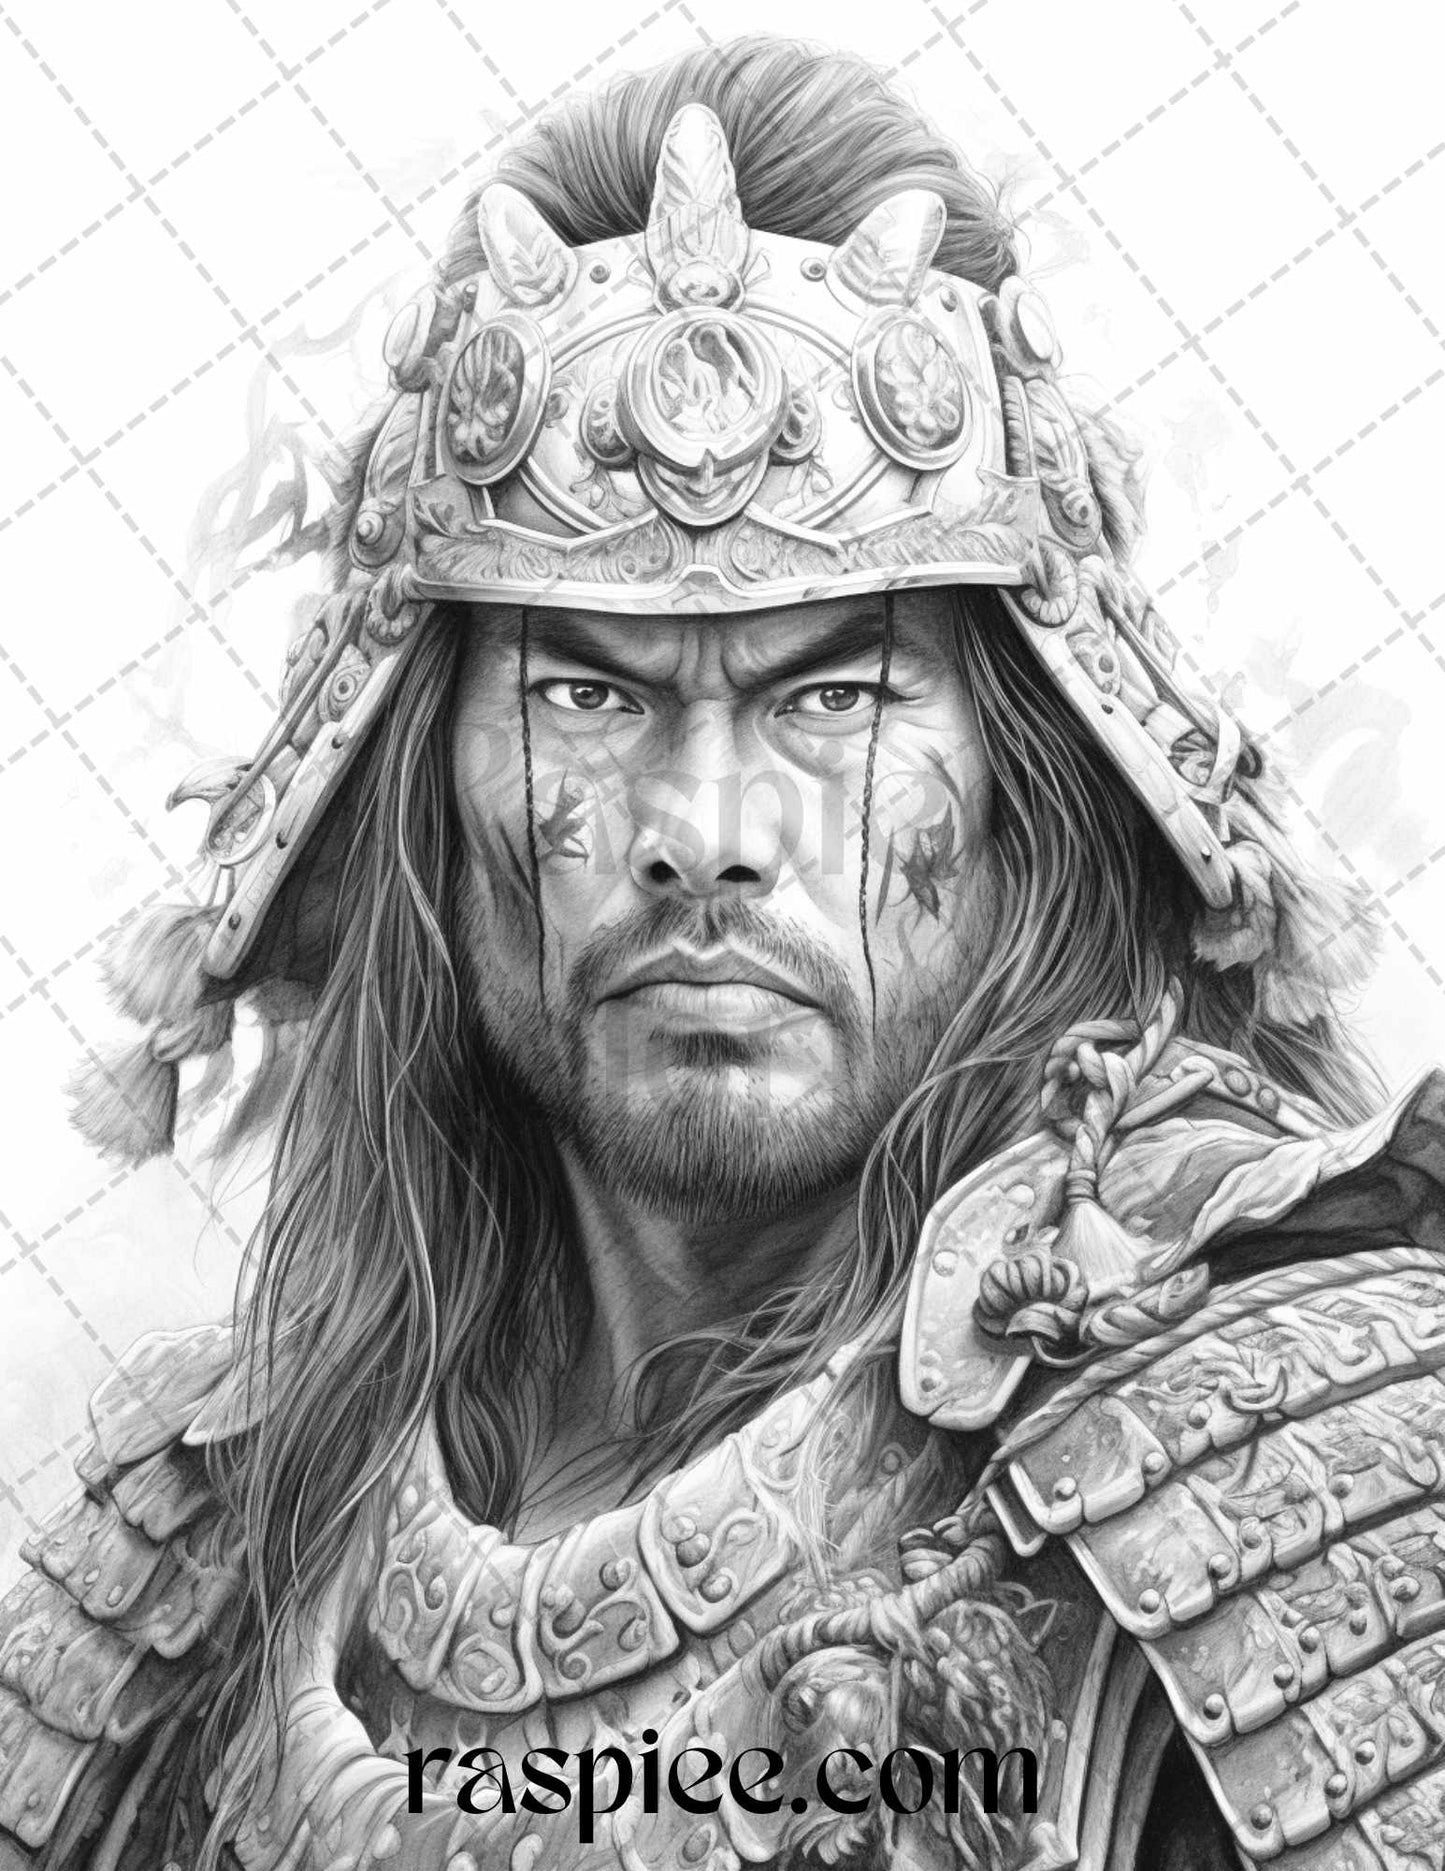 Japanese samurai coloring pages, grayscale printable sheets, adult coloring book, stress relief art, Japanese warriors illustrations